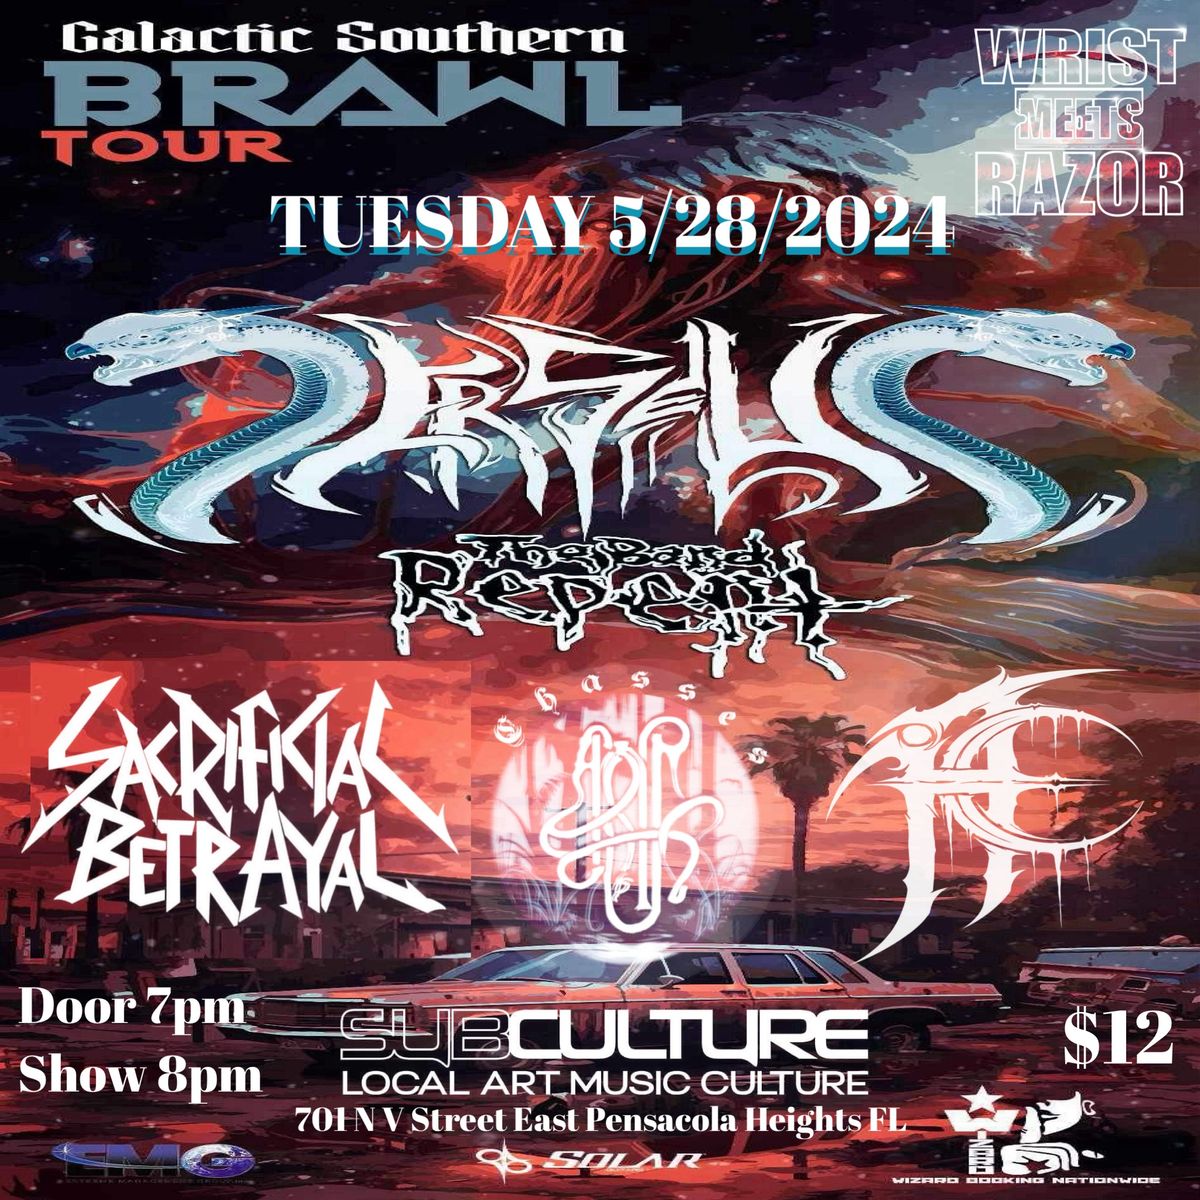 Perseus, The Band Repent, Sacrificial Betrayal , Chasses, and Accursed Creator at Subculture 